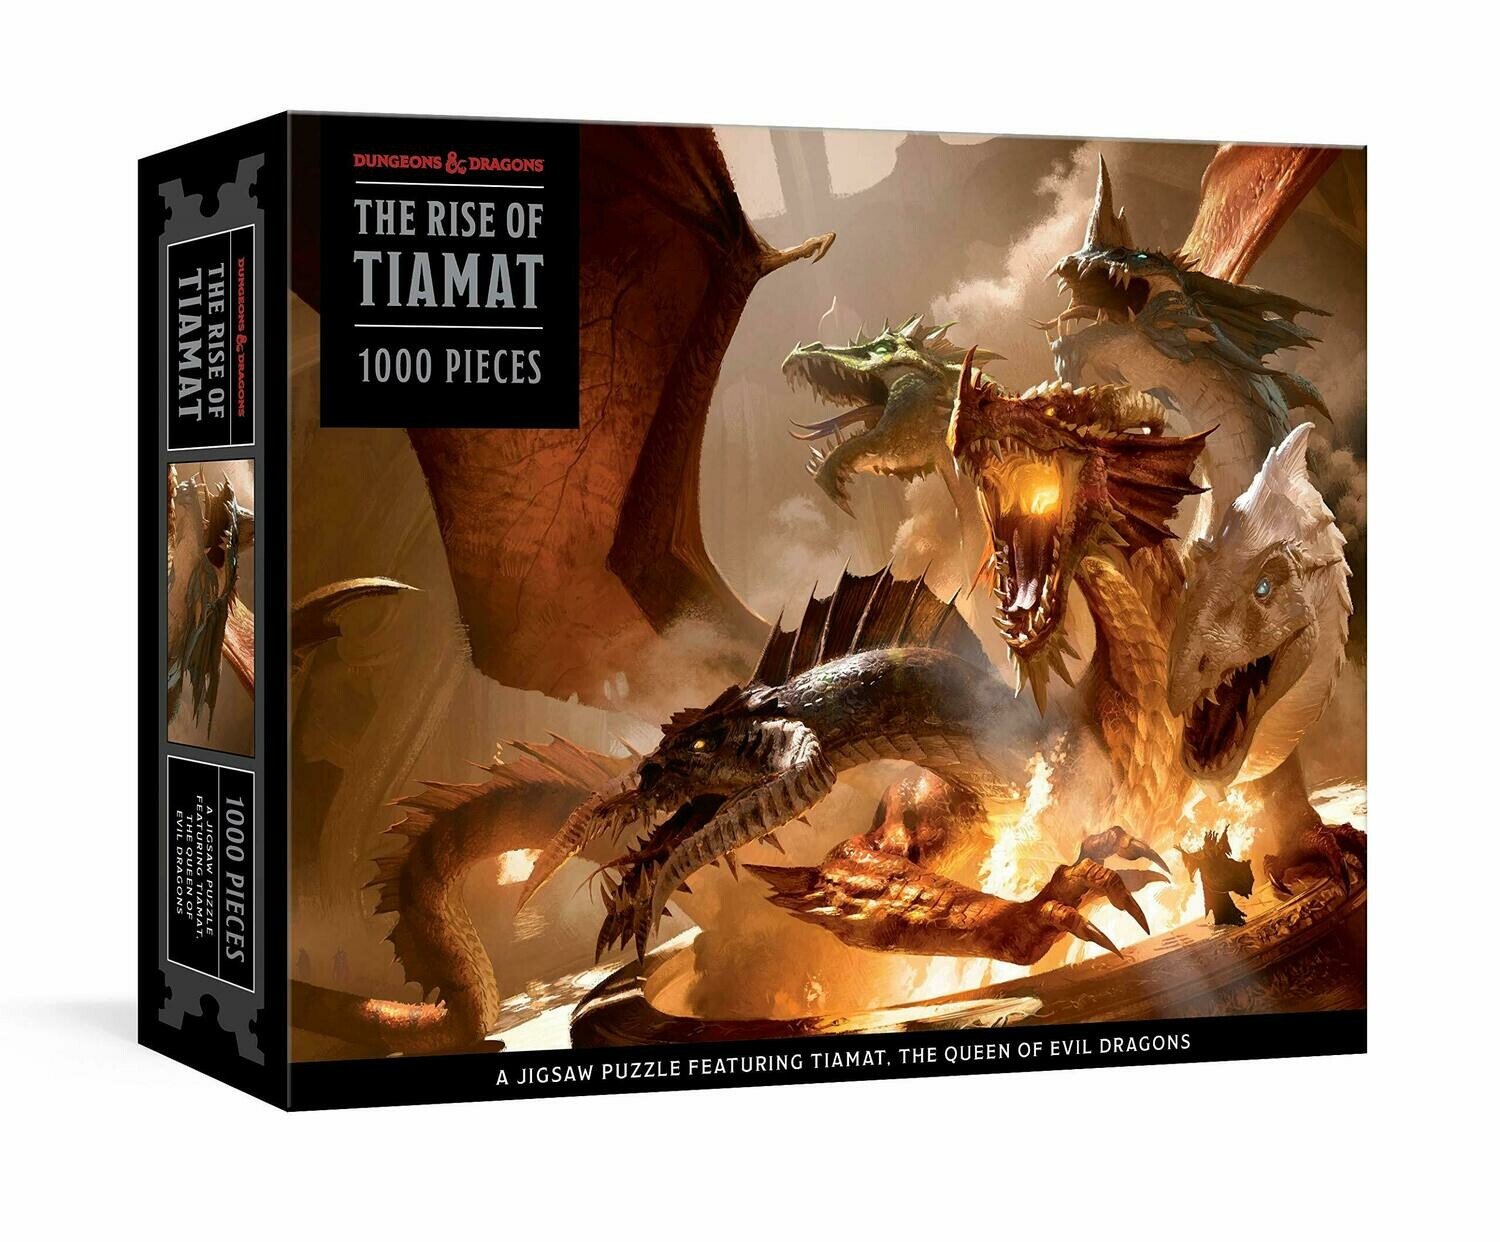 Dungeons & Dragons: The Rise of Tiamat 1000 Piece Jigsaw Puzzle